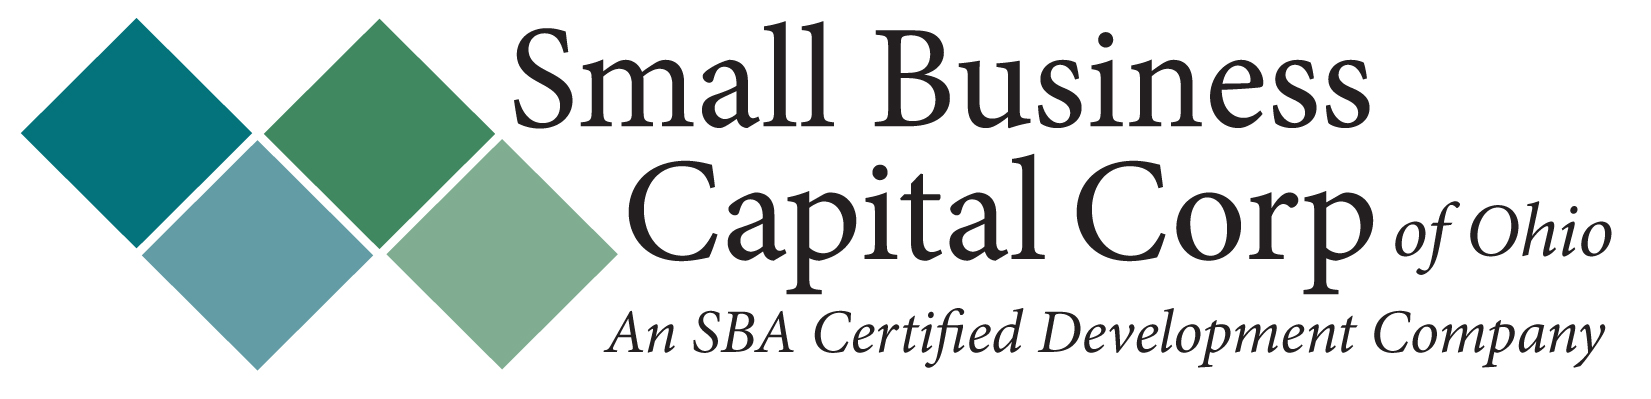 Small Business Capital Corp adopted its new name to reflect its commitment to serving small businesses throughout Northeast Ohio